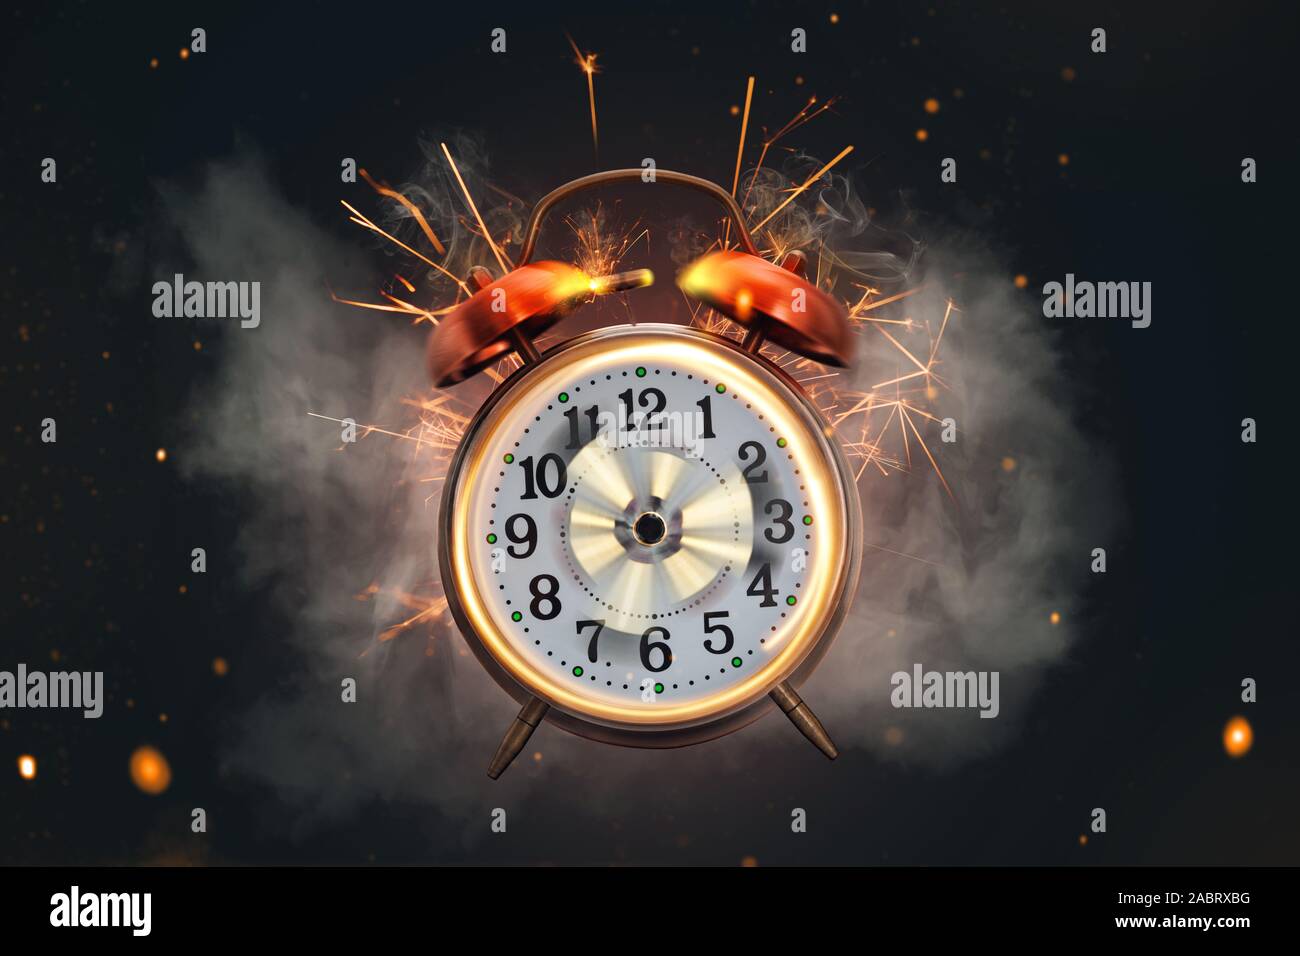 Alarm clock out of control Stock Photo